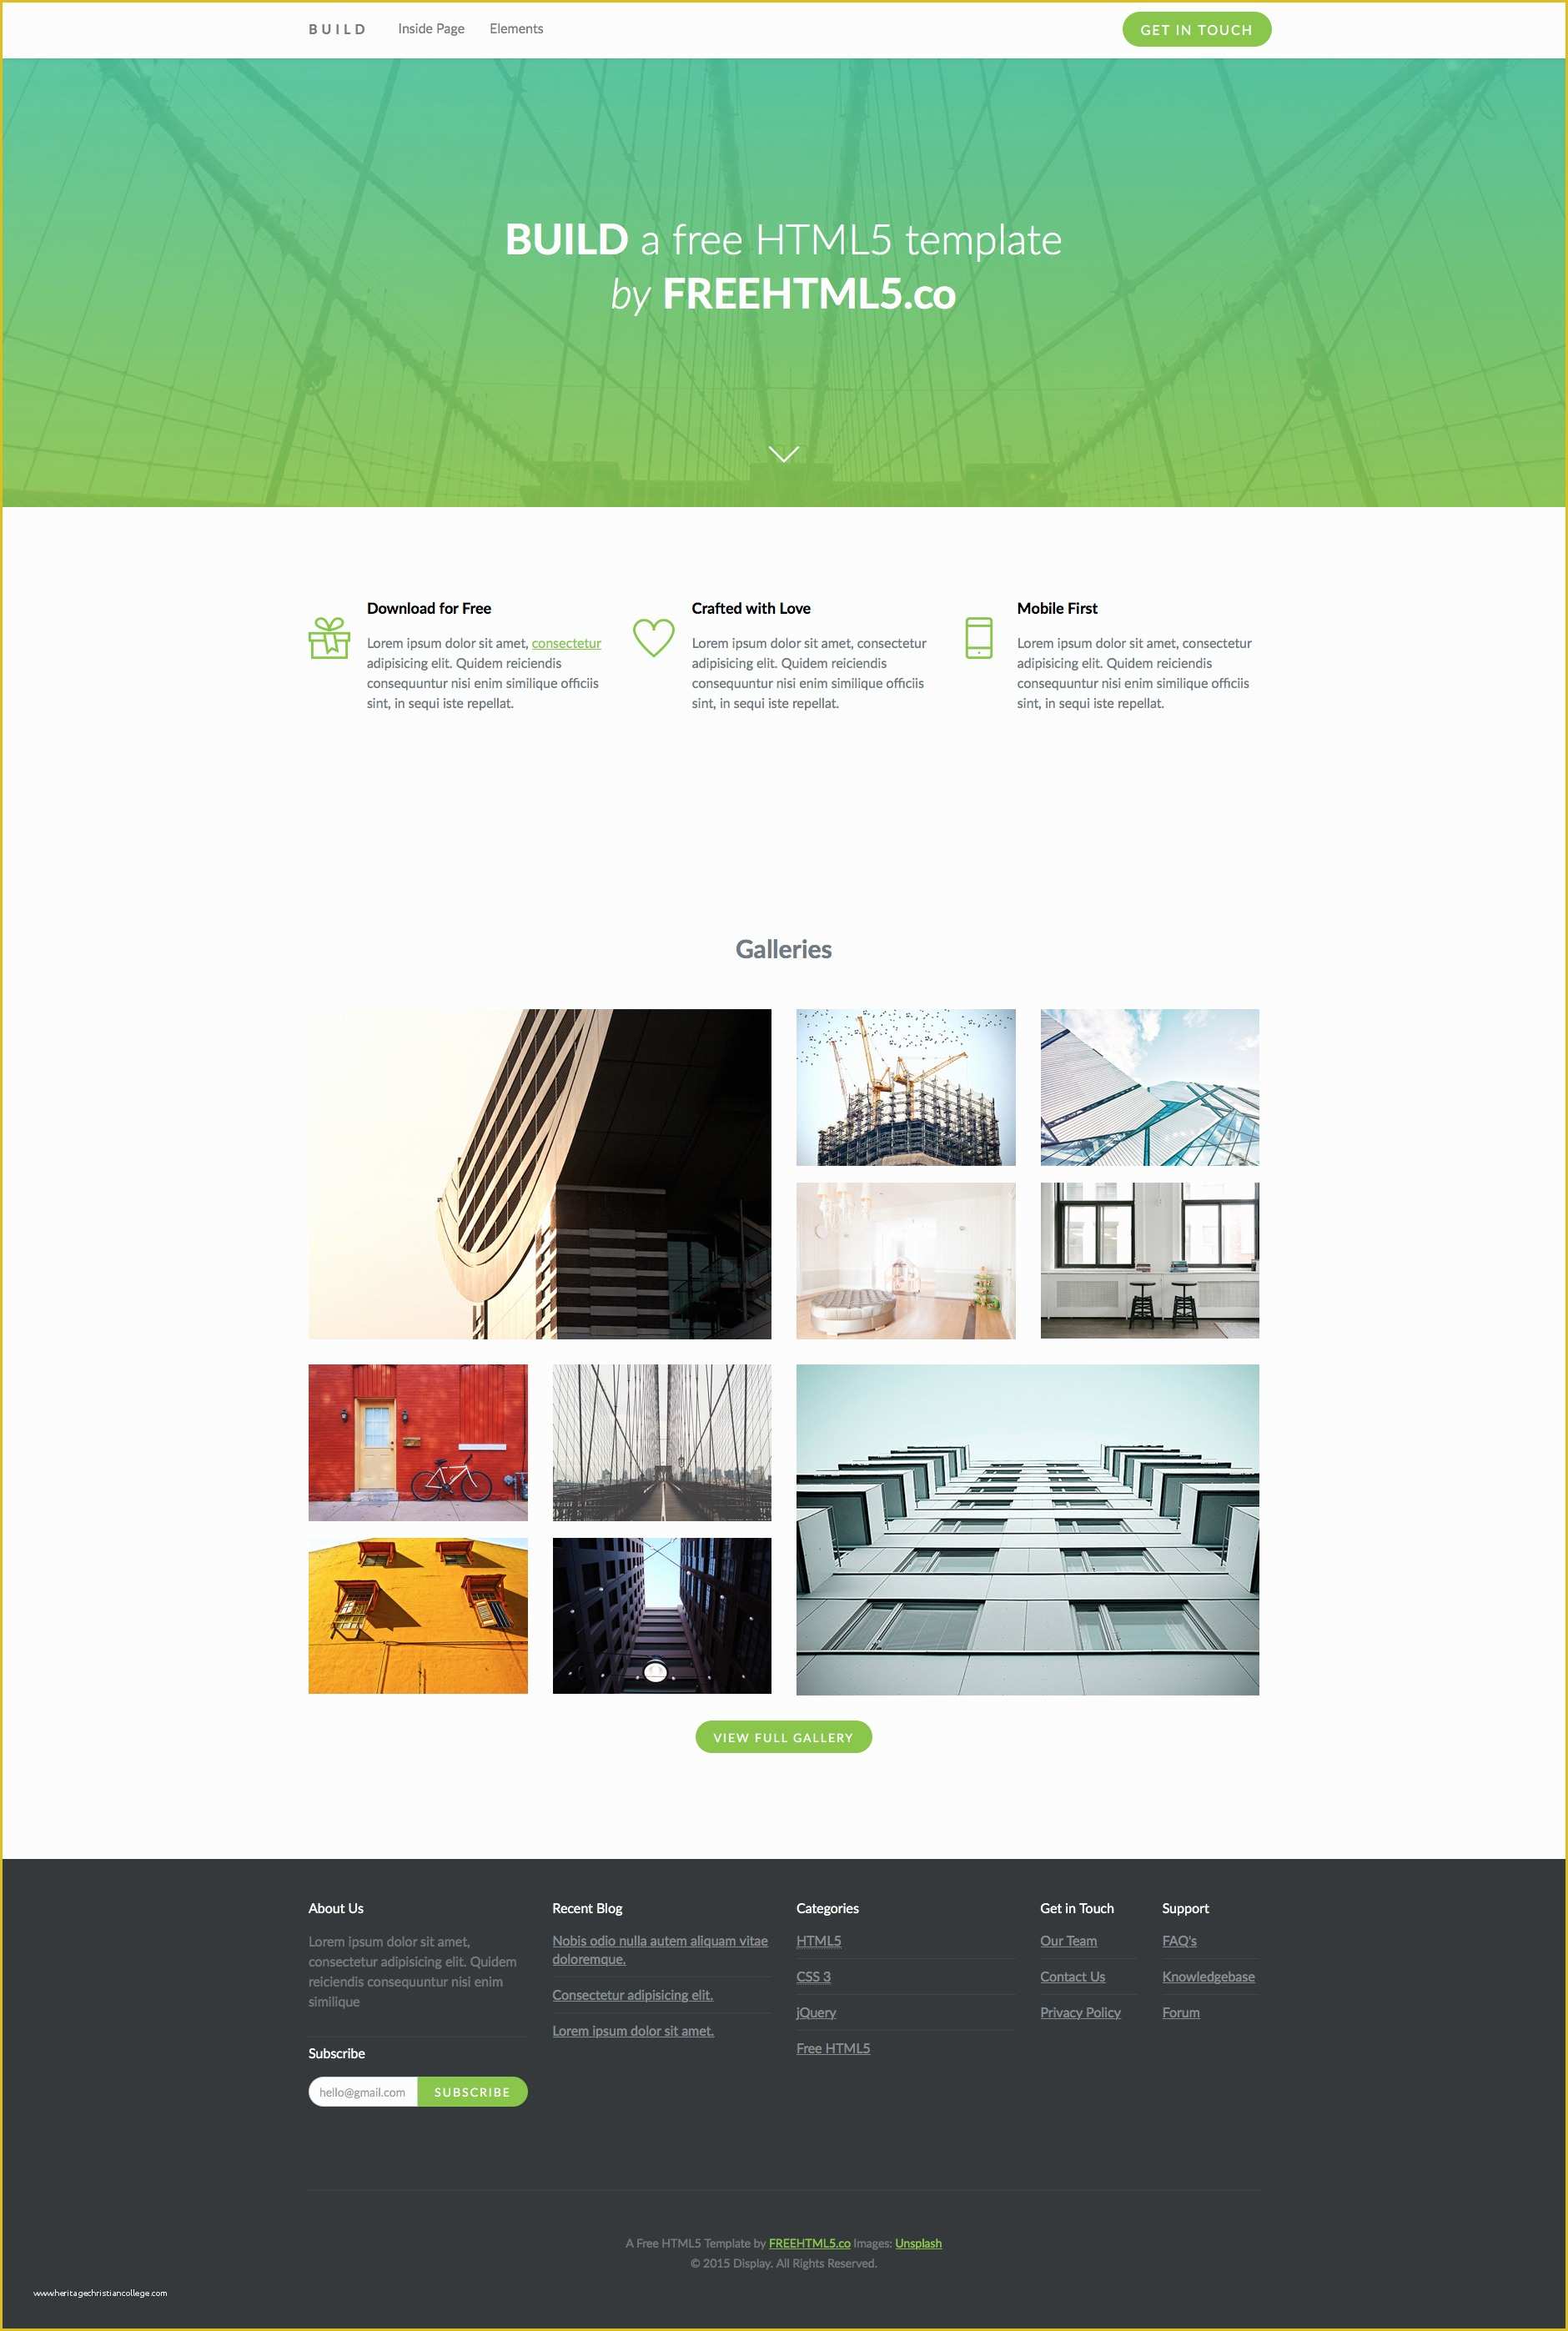 Html5 Responsive Templates Free Download Of Build Free Responsive HTML5 Bootstrap Business Template